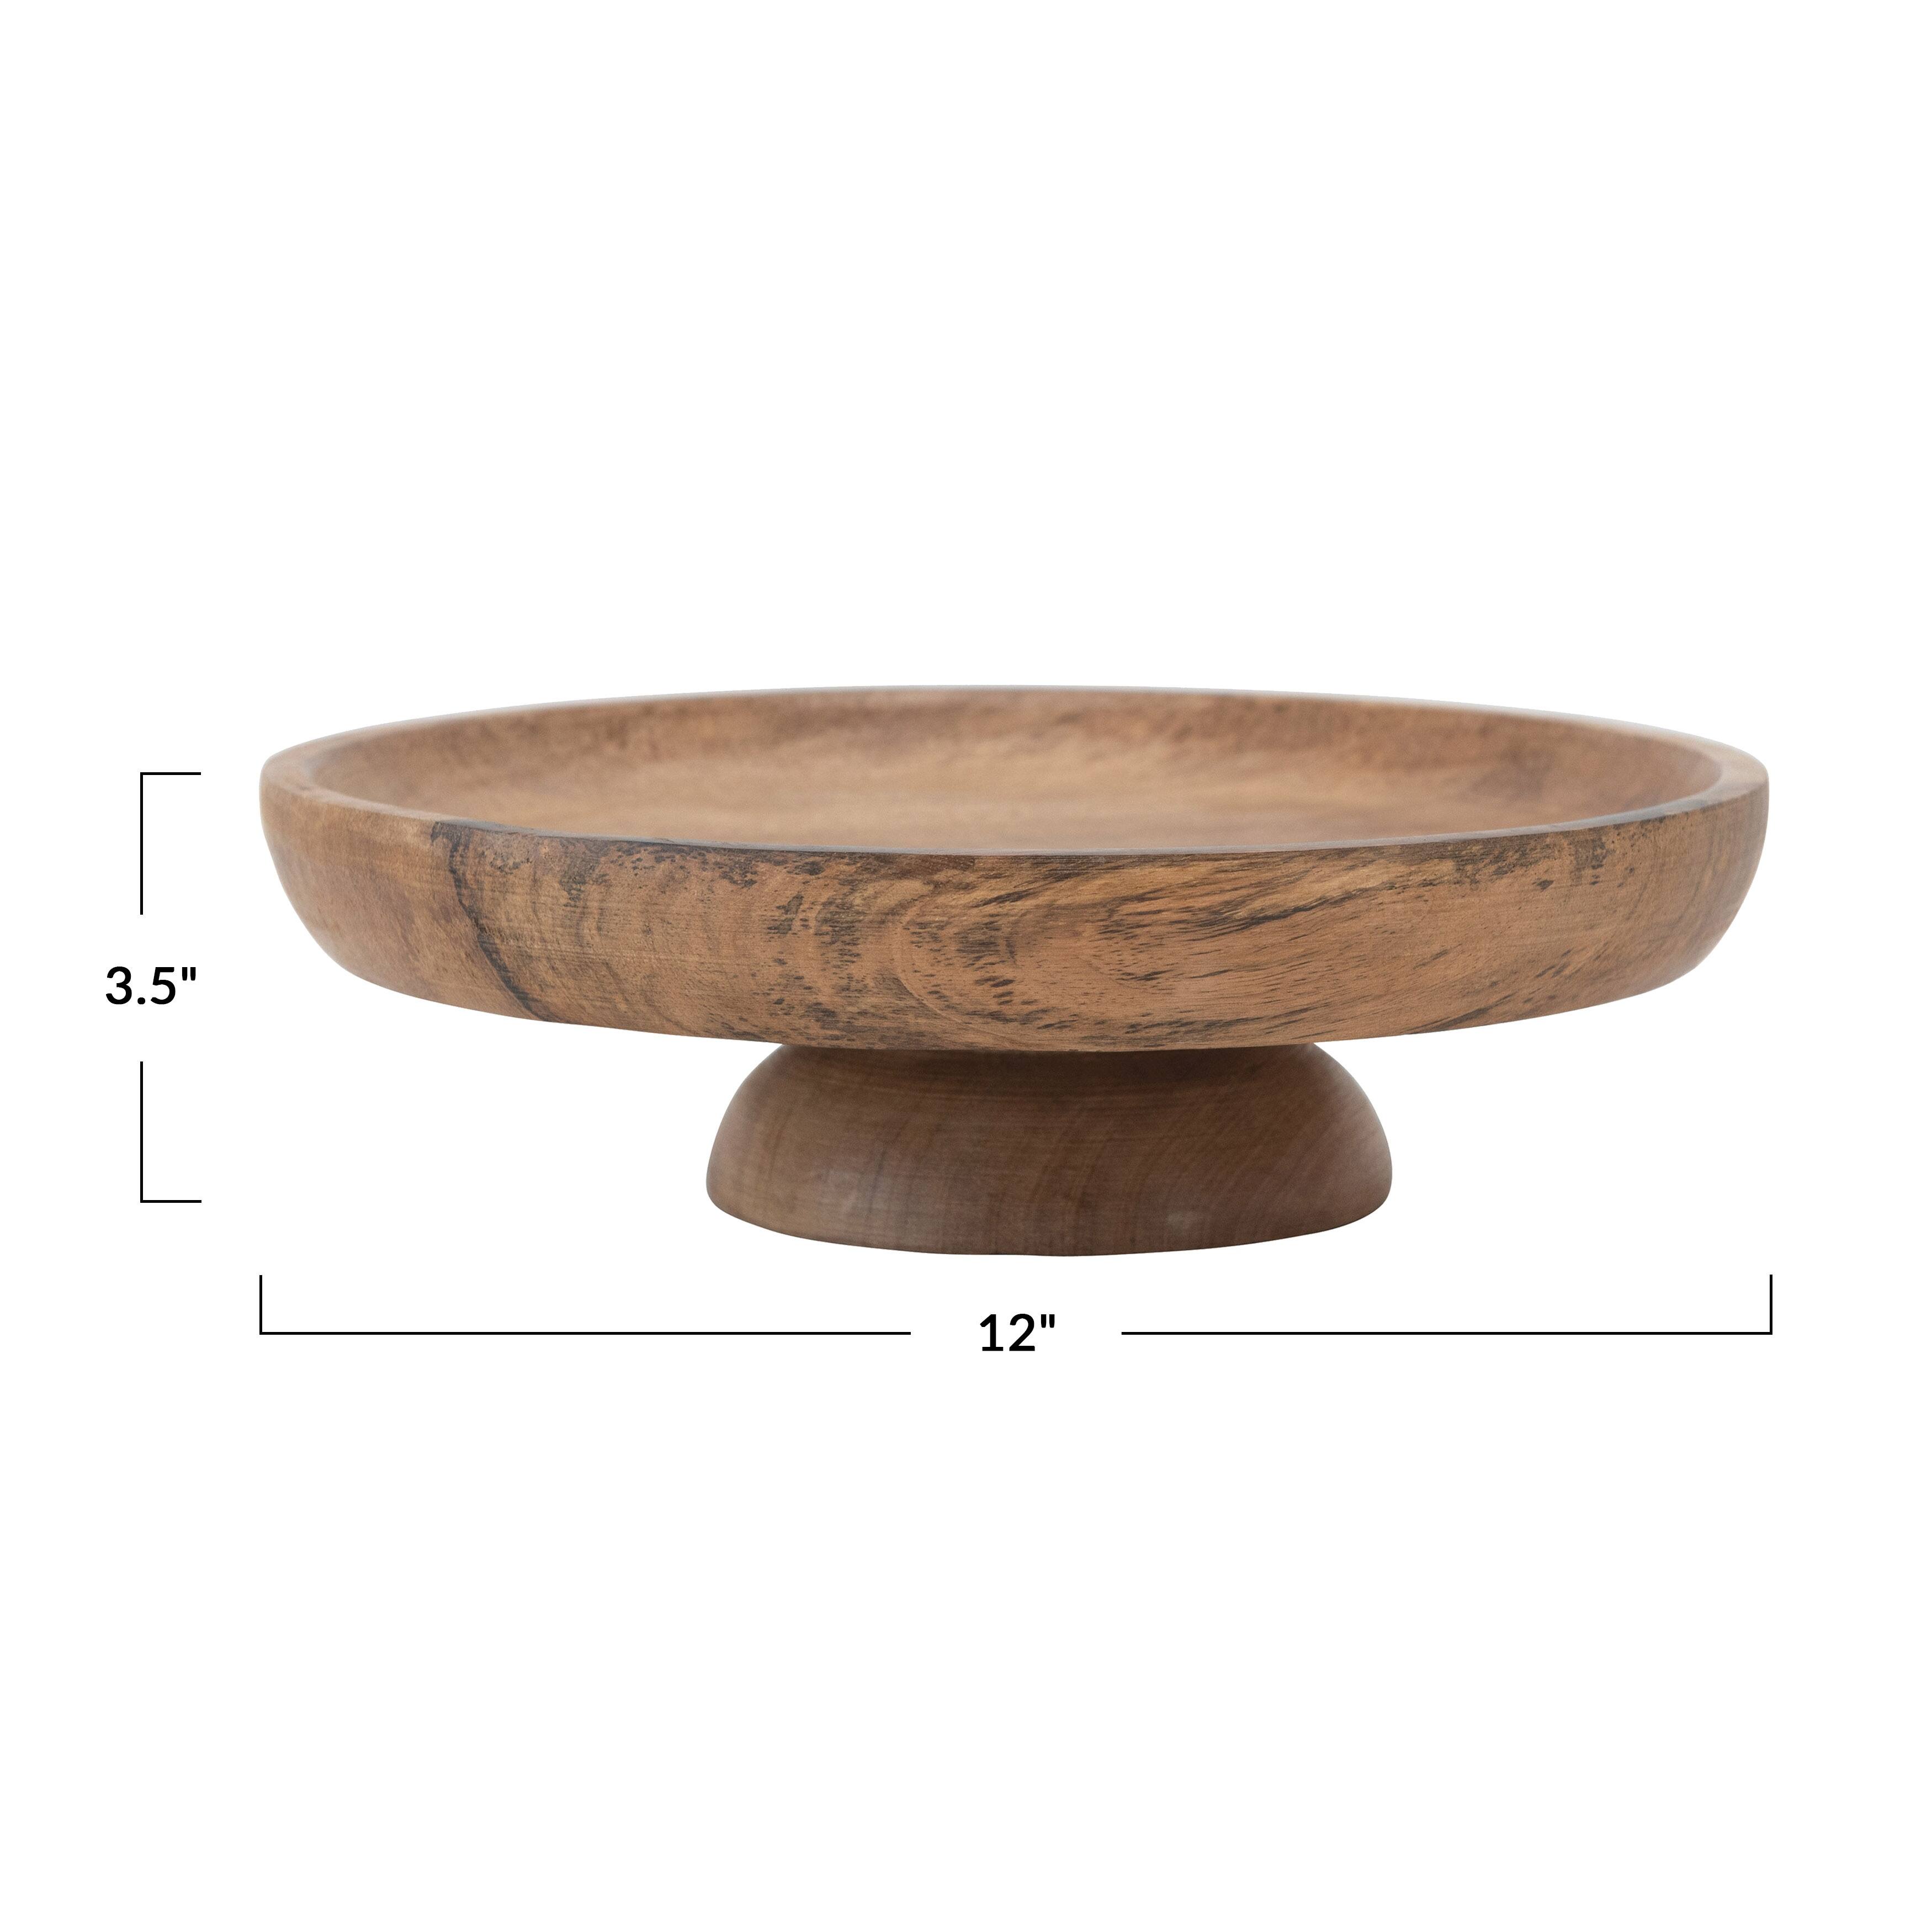 Round Natural Mango Wood Footed Bowl Cake Stand